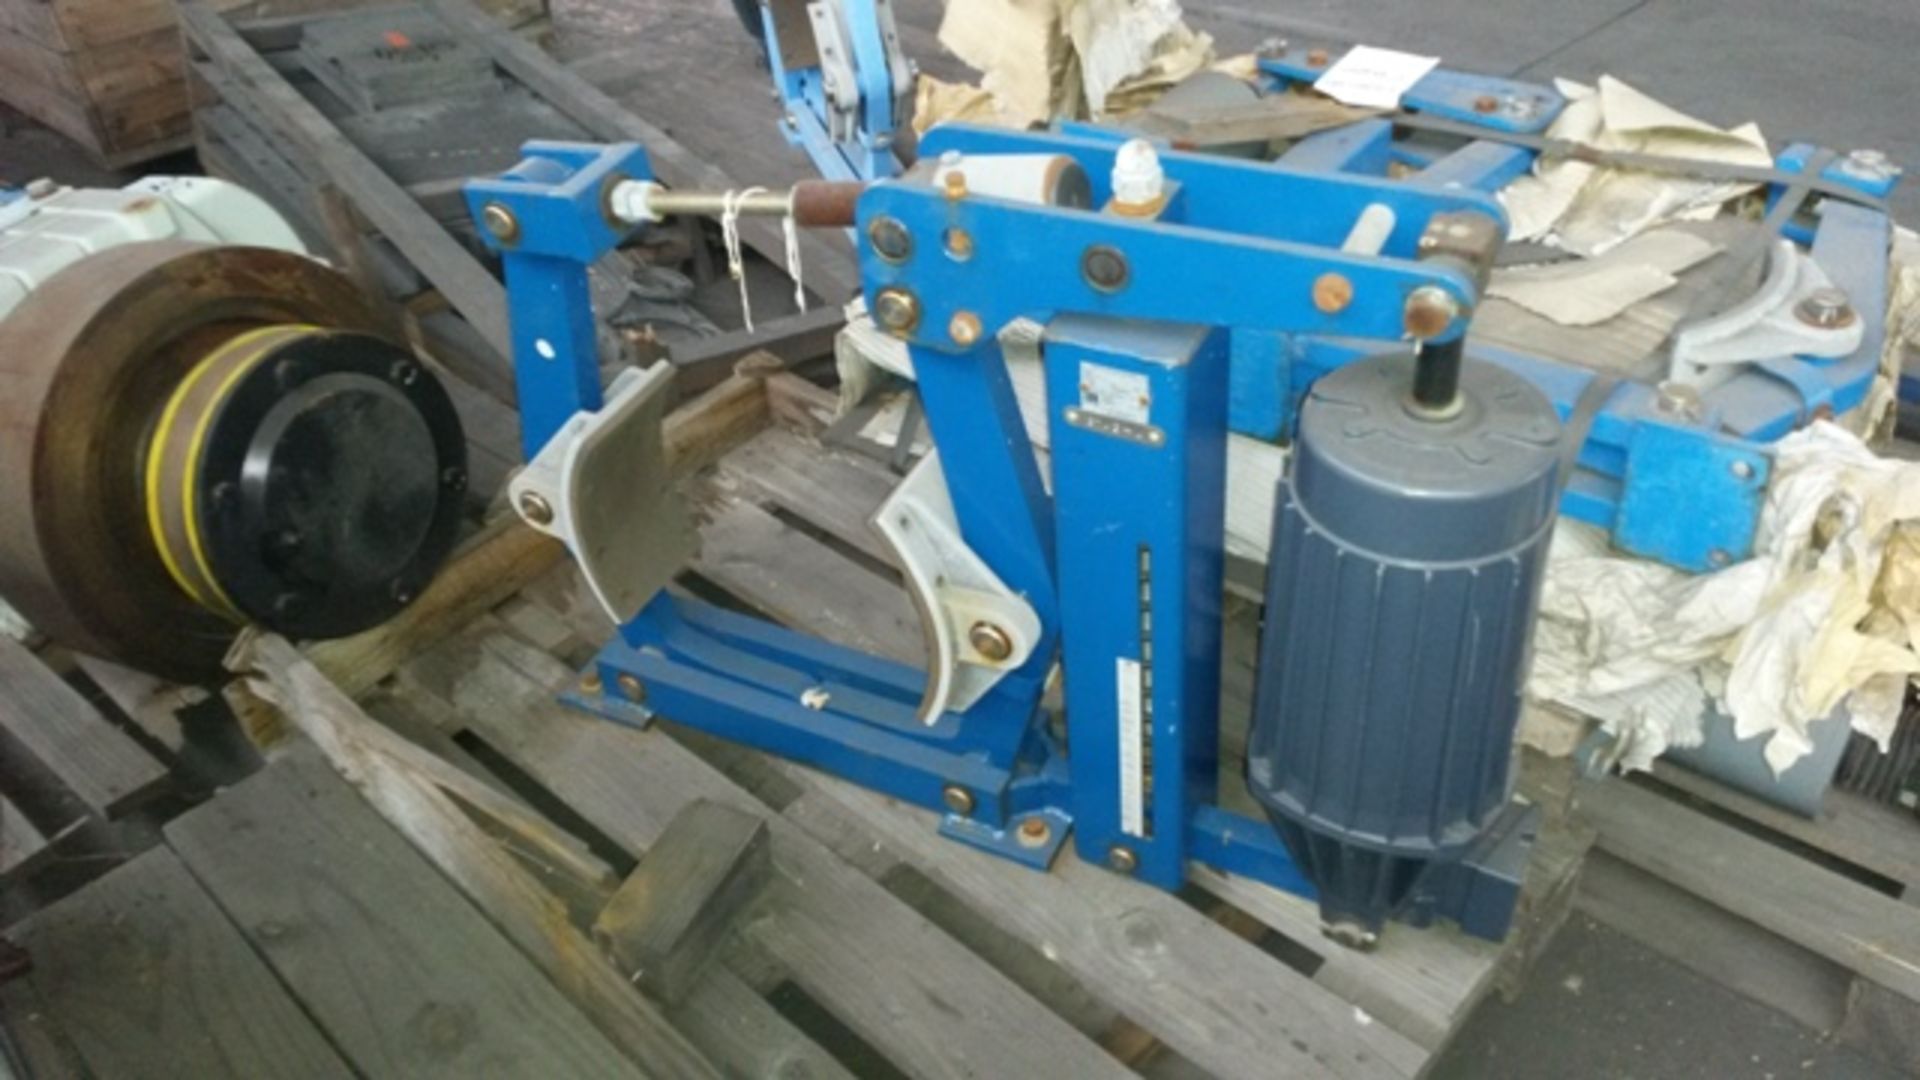 7 X PNEUMATIC BINSI DRUM BRAKES - TO BE SOLD AS ONE LOT (LOCATED IN RICHARDS BAY, KZN) - Image 5 of 5